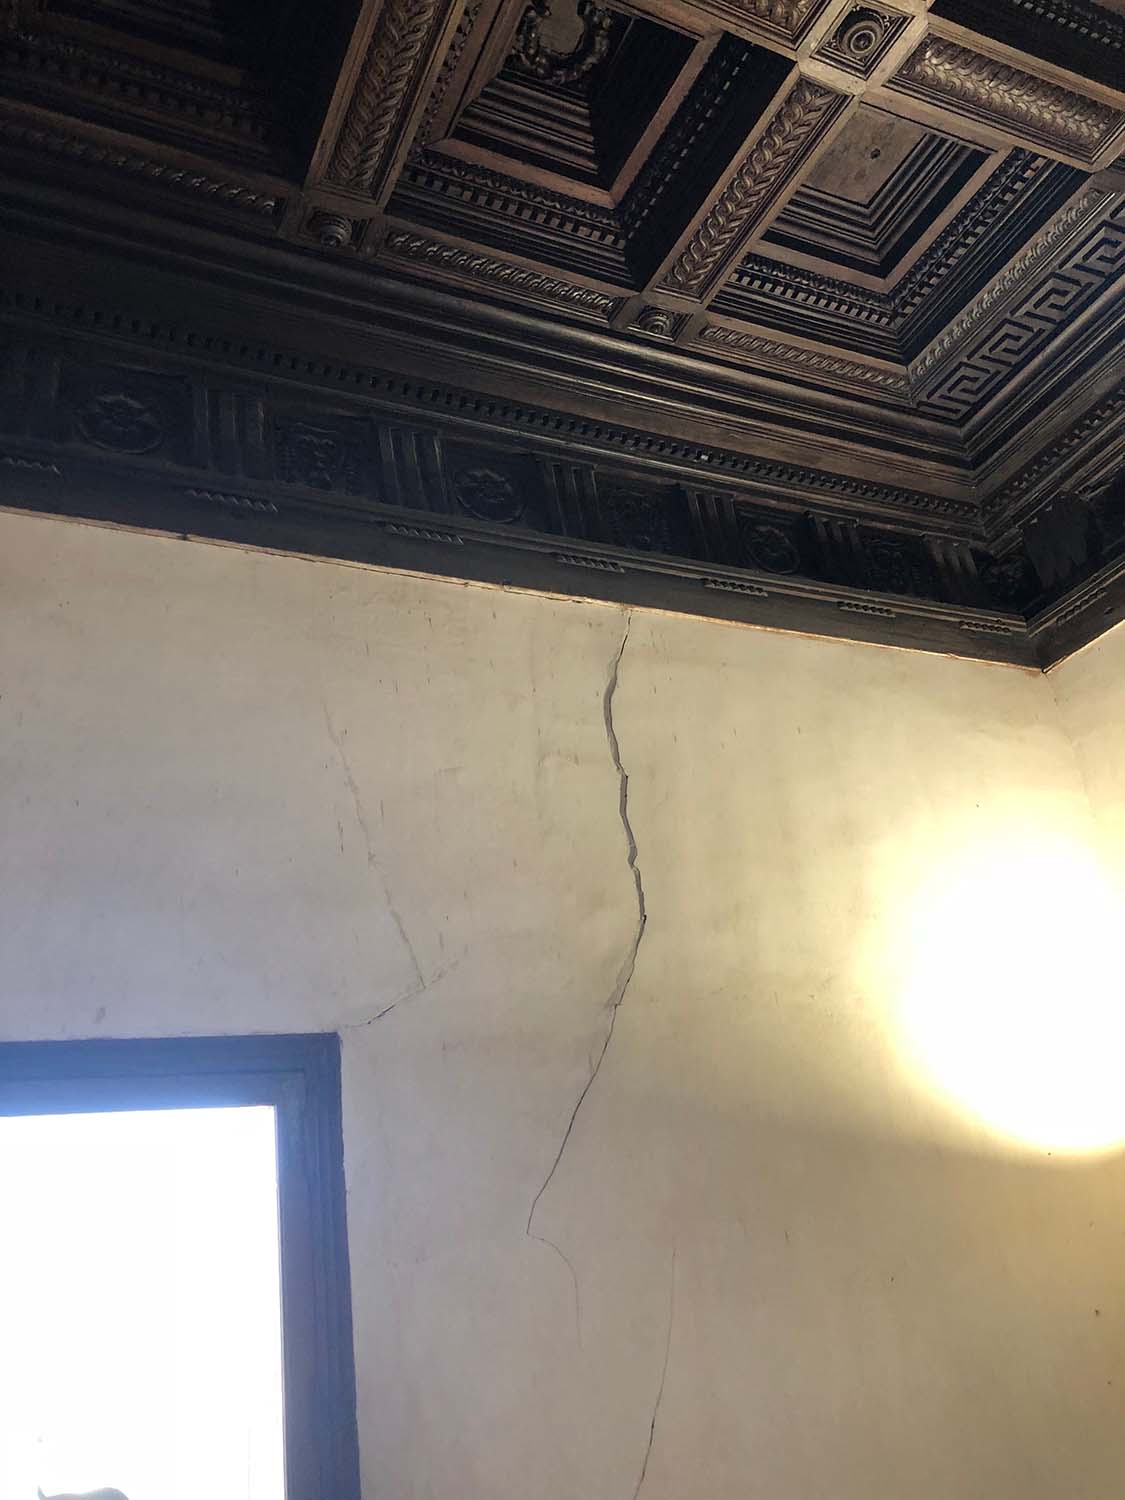 View of cracked plaster in a corner of the Emperor's Chambers